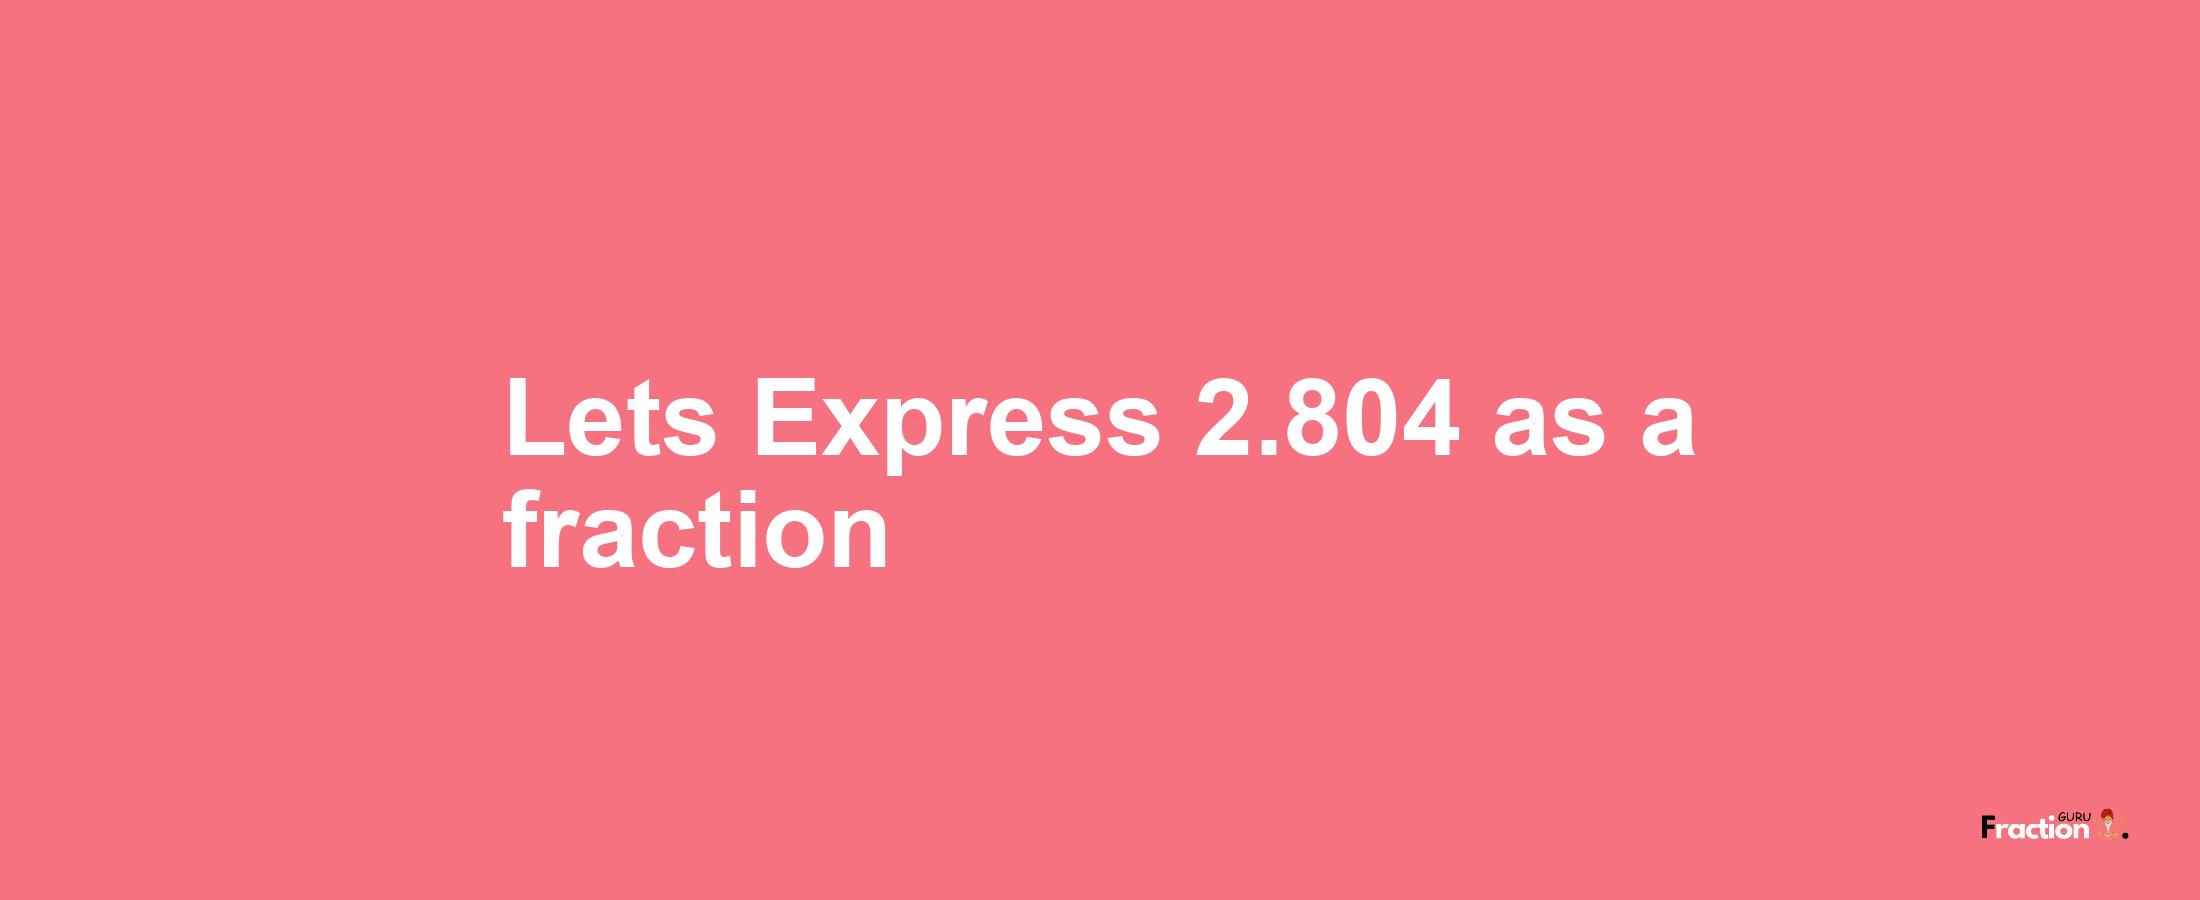 Lets Express 2.804 as afraction